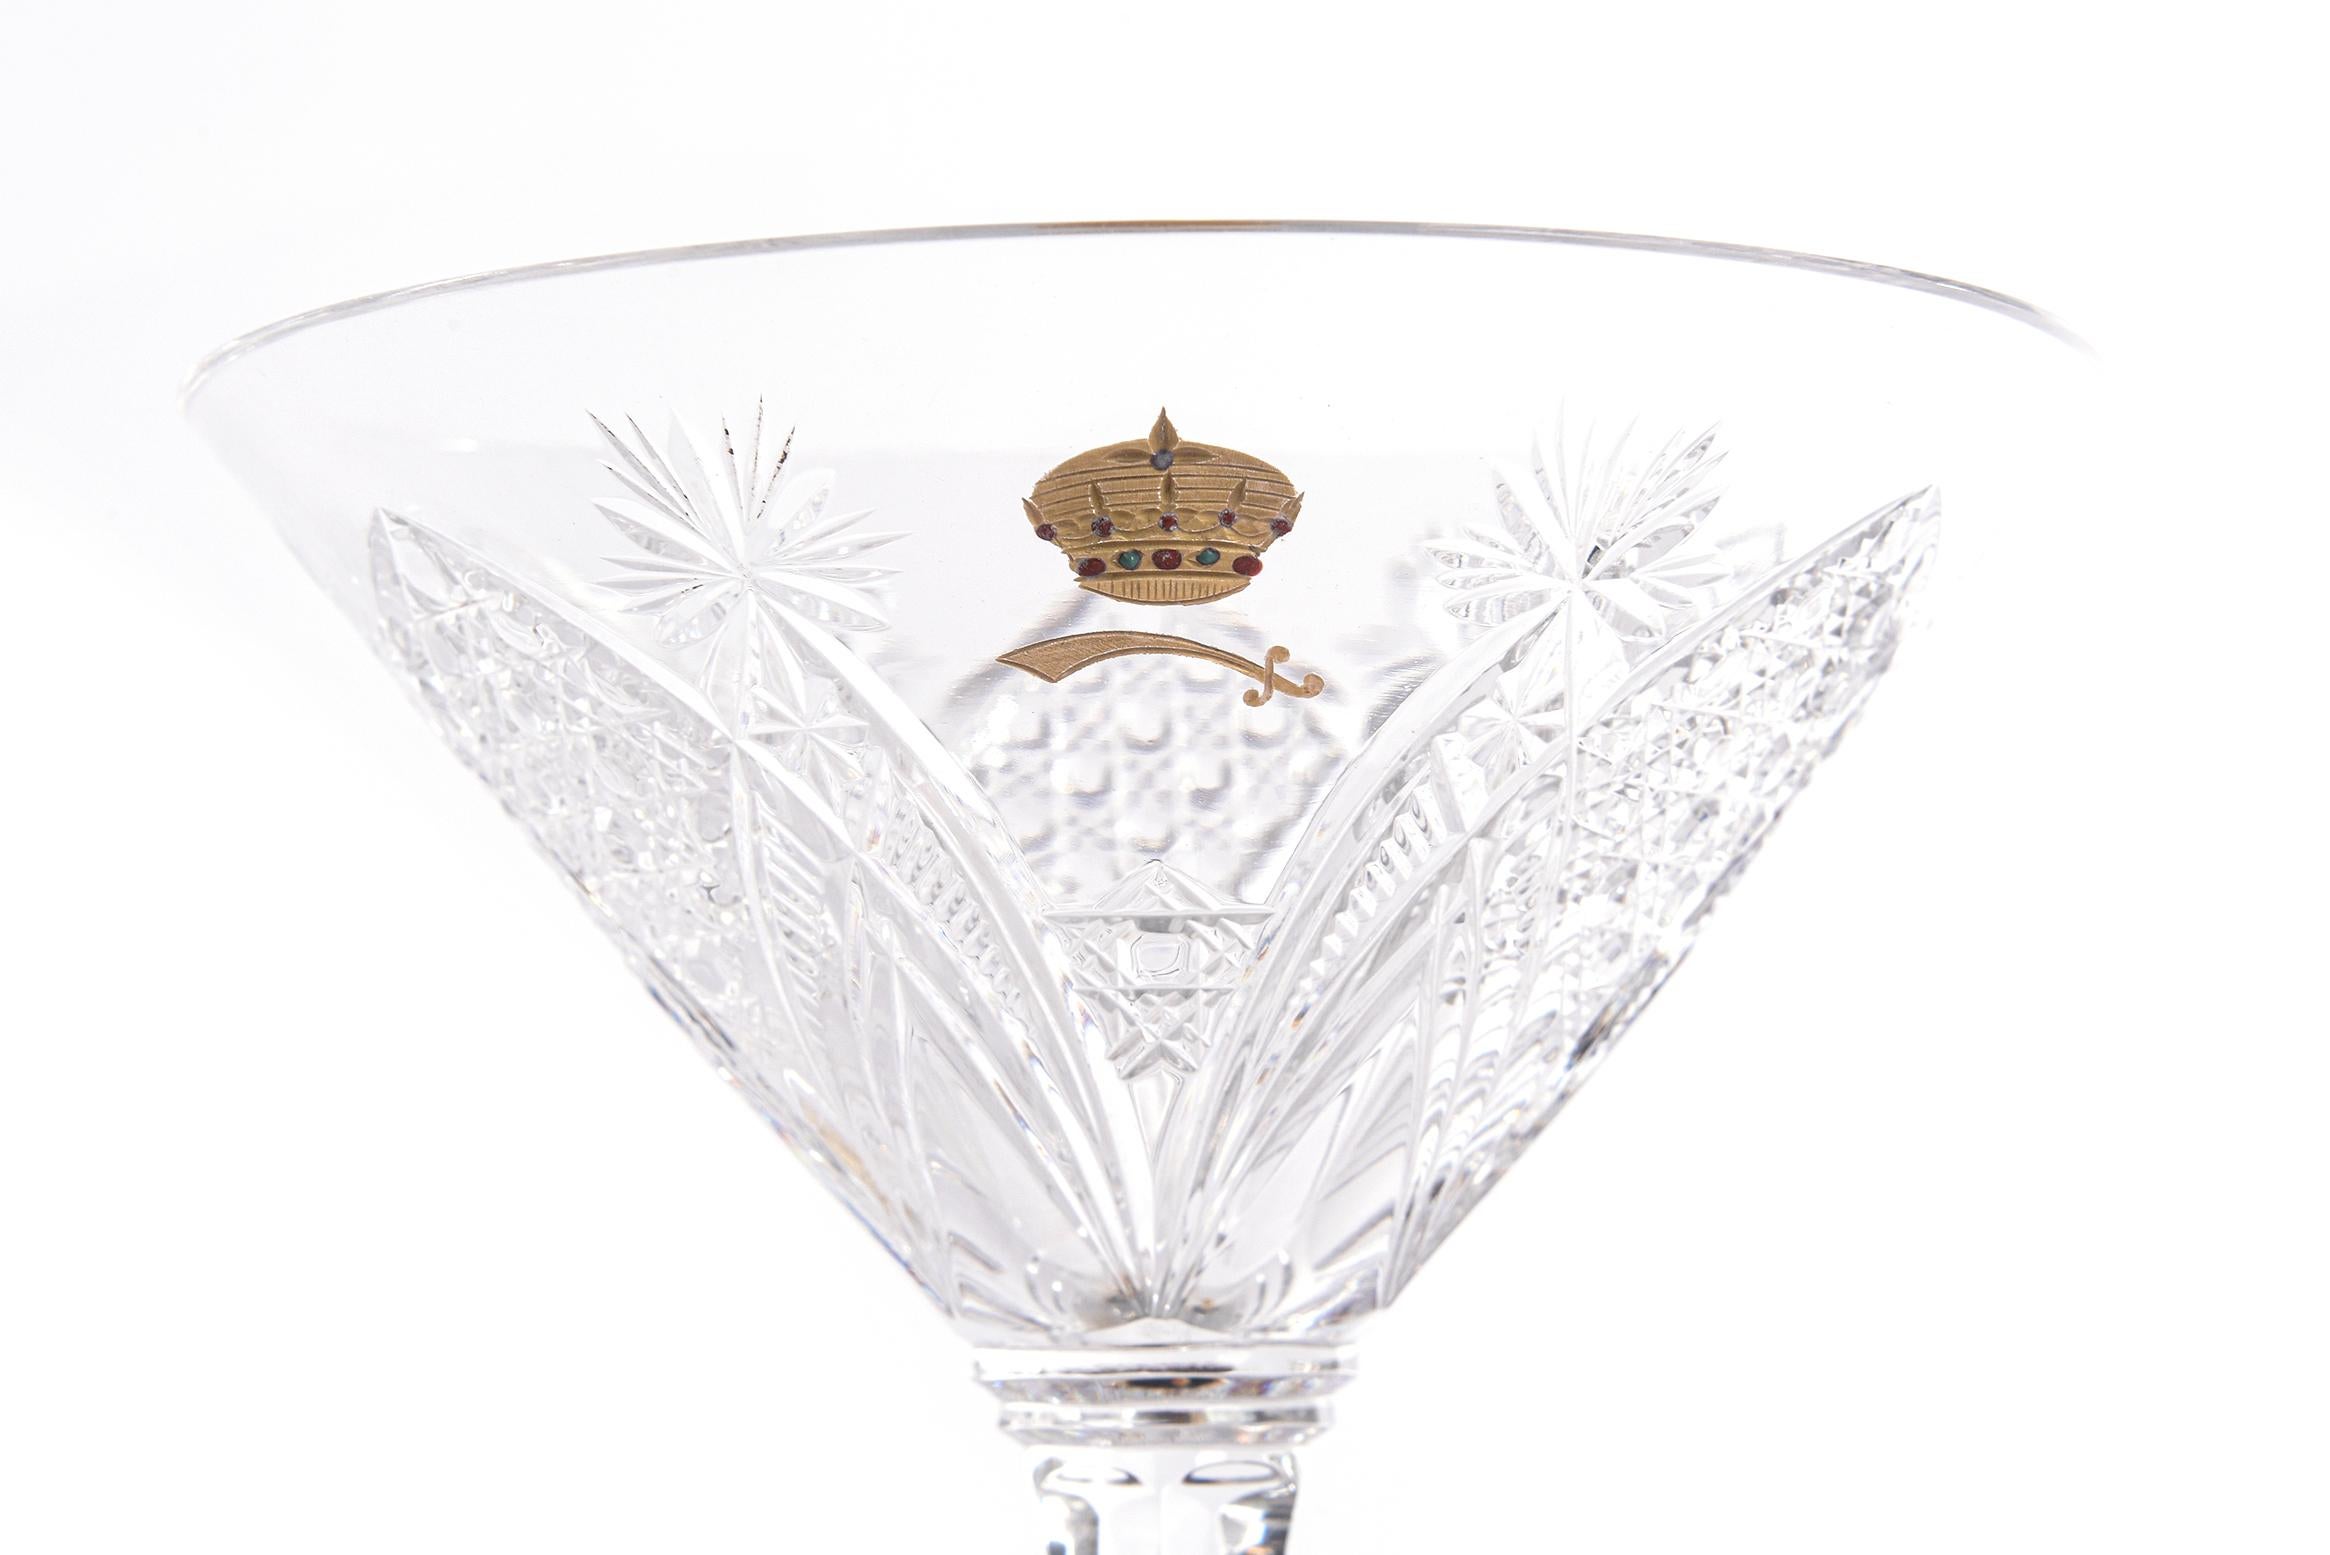 A wonderful opportunity to add to your Museum Quality collection. Please see our other listings for this rare pattern that has been gracing Royal tables since the early 1900s. From France's premier Cristallerie, Baccarat, this hand blown and cut